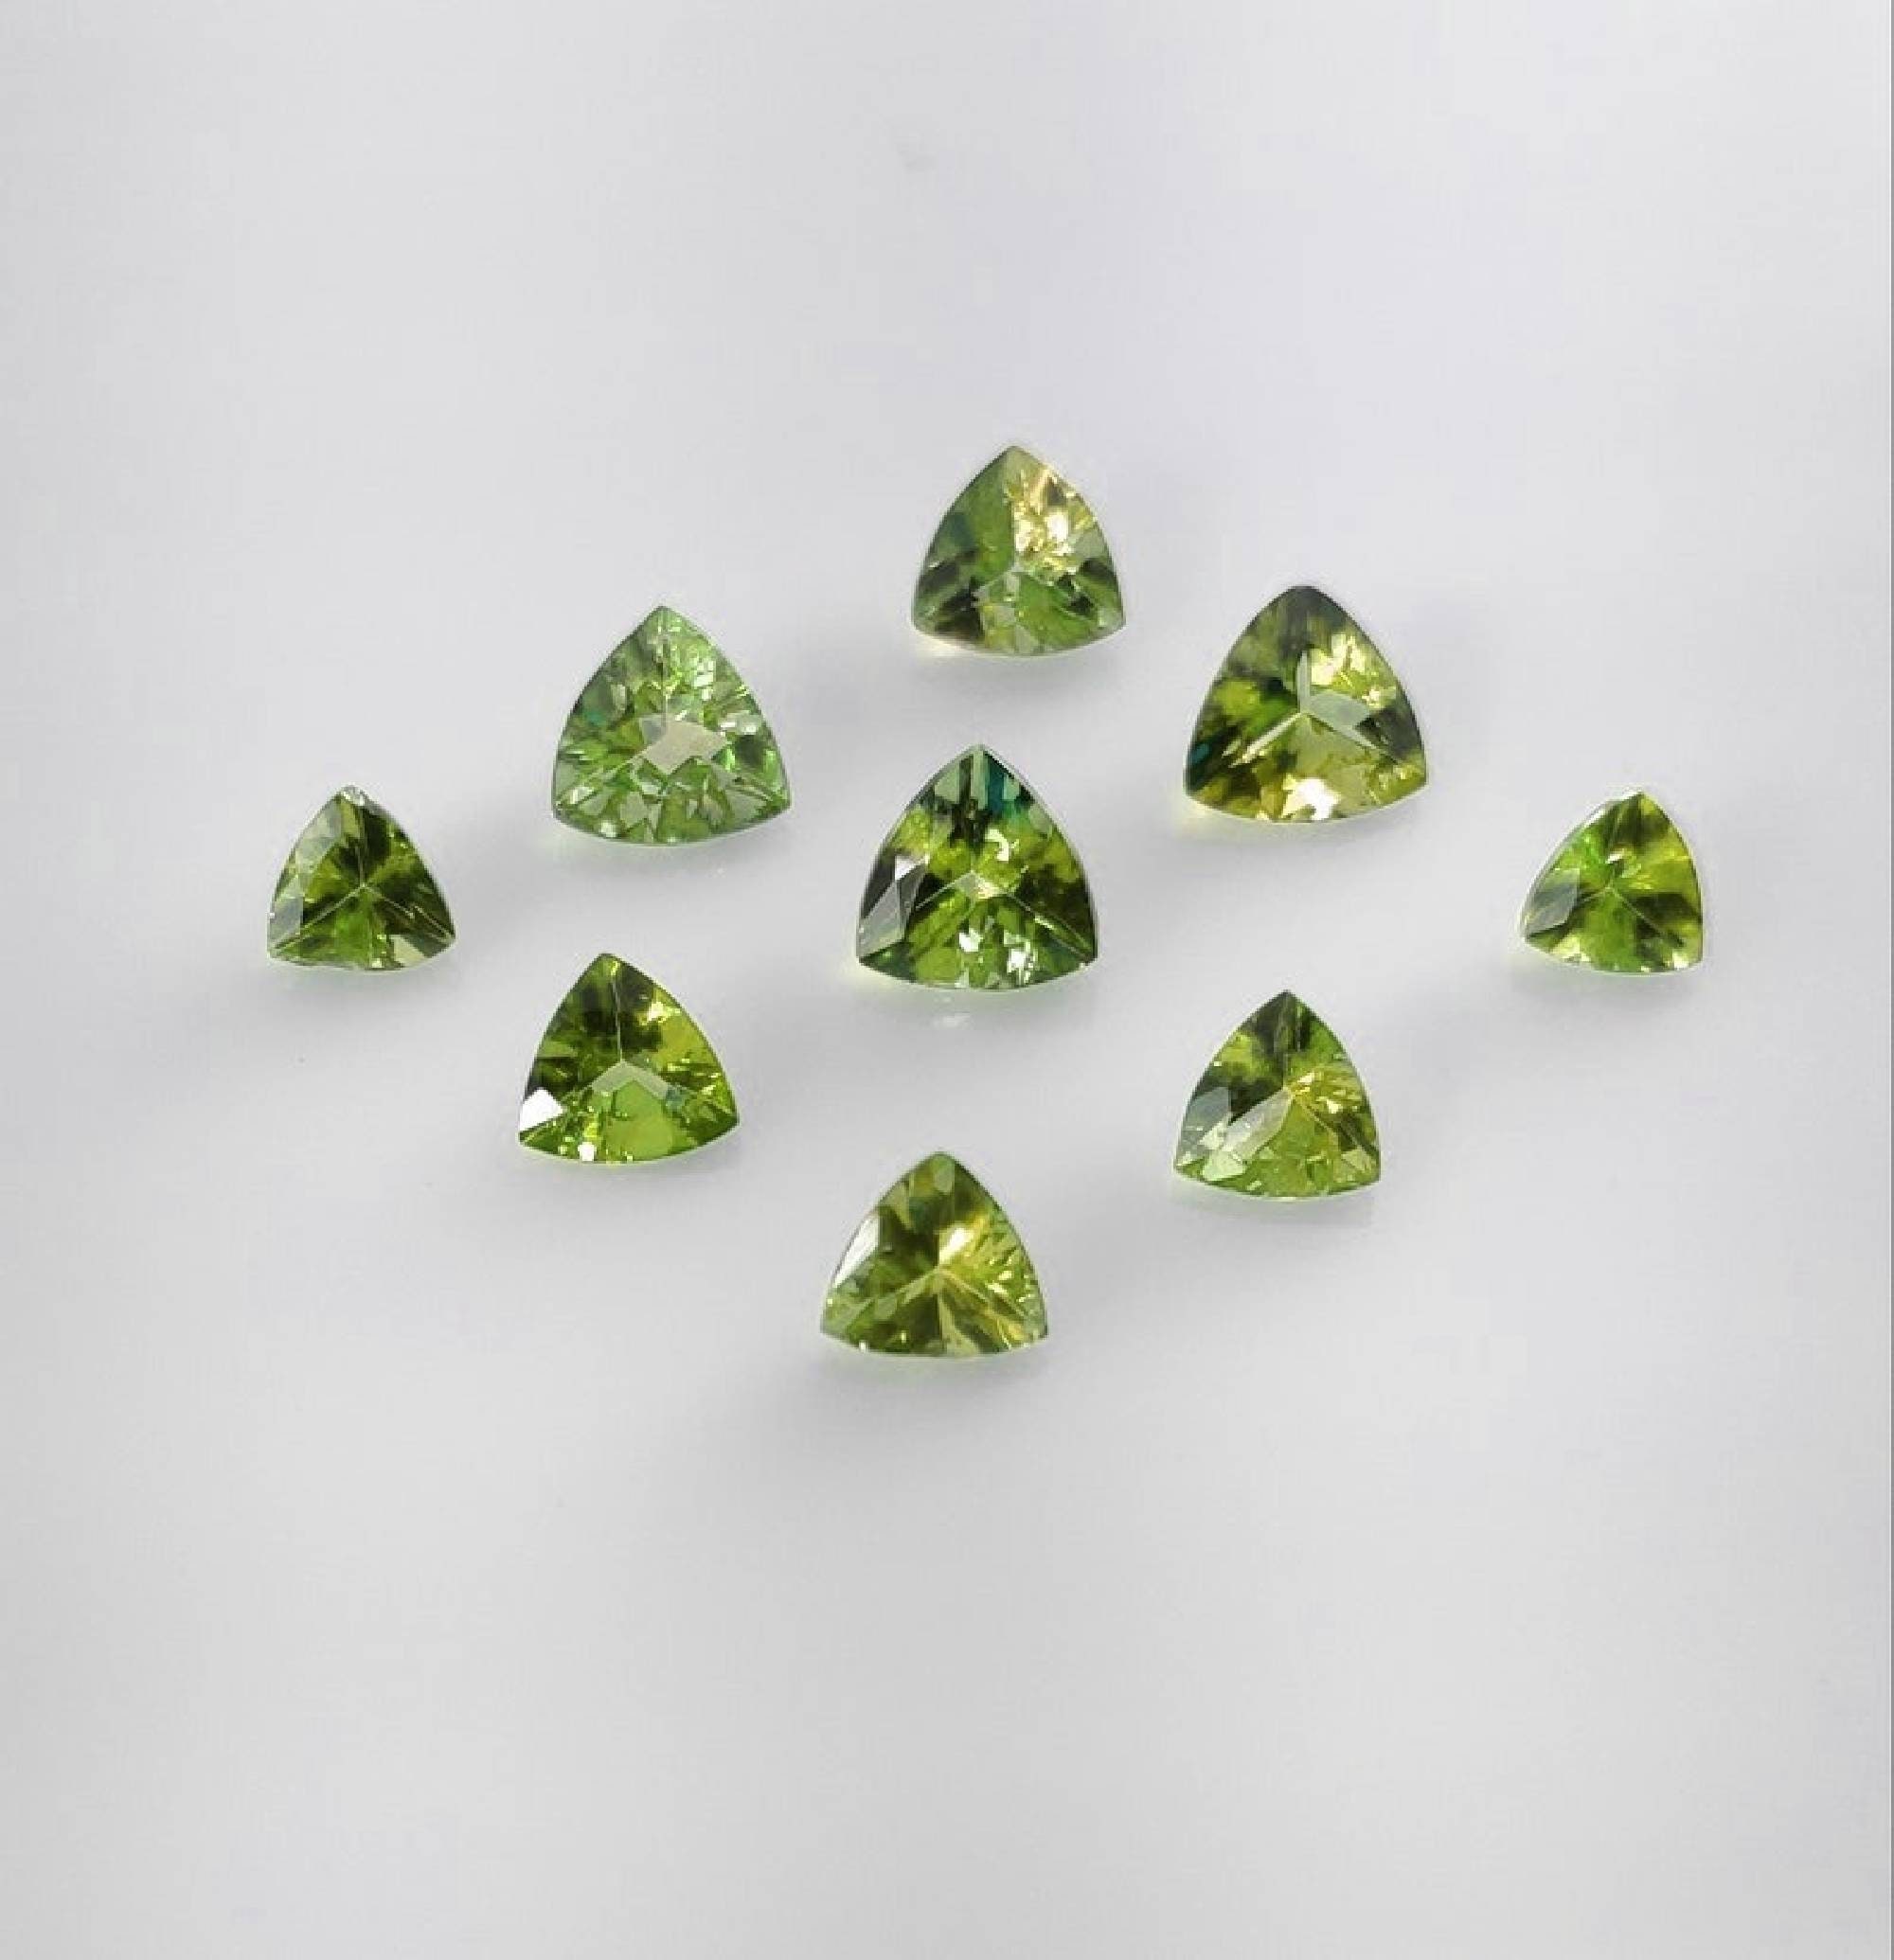 100 pcs Round AAA Top Quality Loose Gemstones gems india Natural Peridot 3 mm 